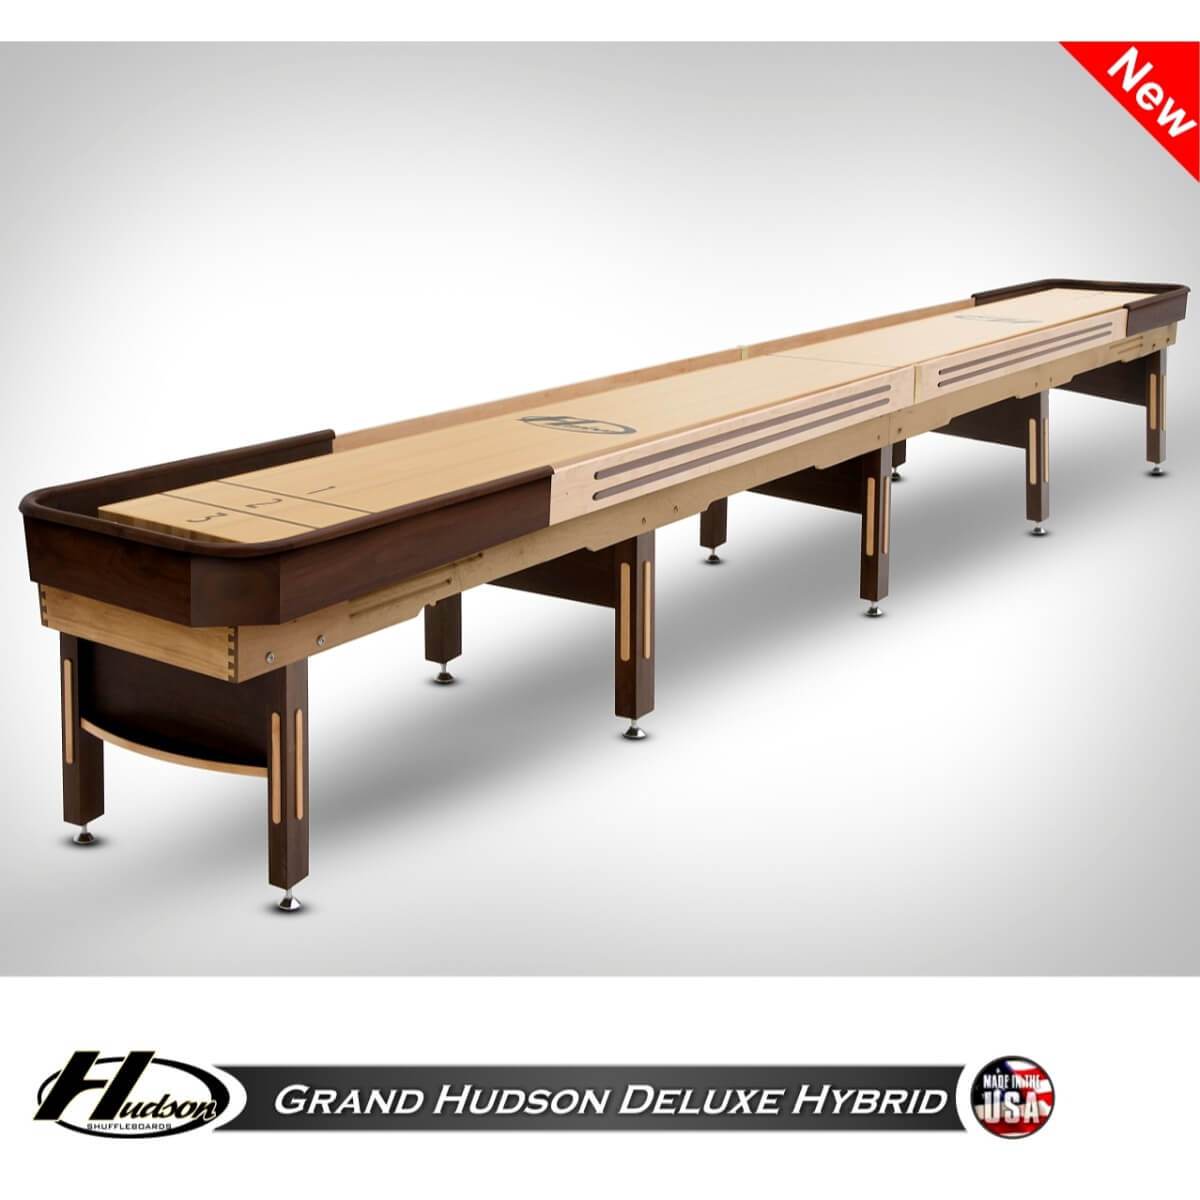 Grand Hudson Deluxe Hybrid Shuffleboard Table 9'-22' with Custom Stain Options - Gaming Blaze